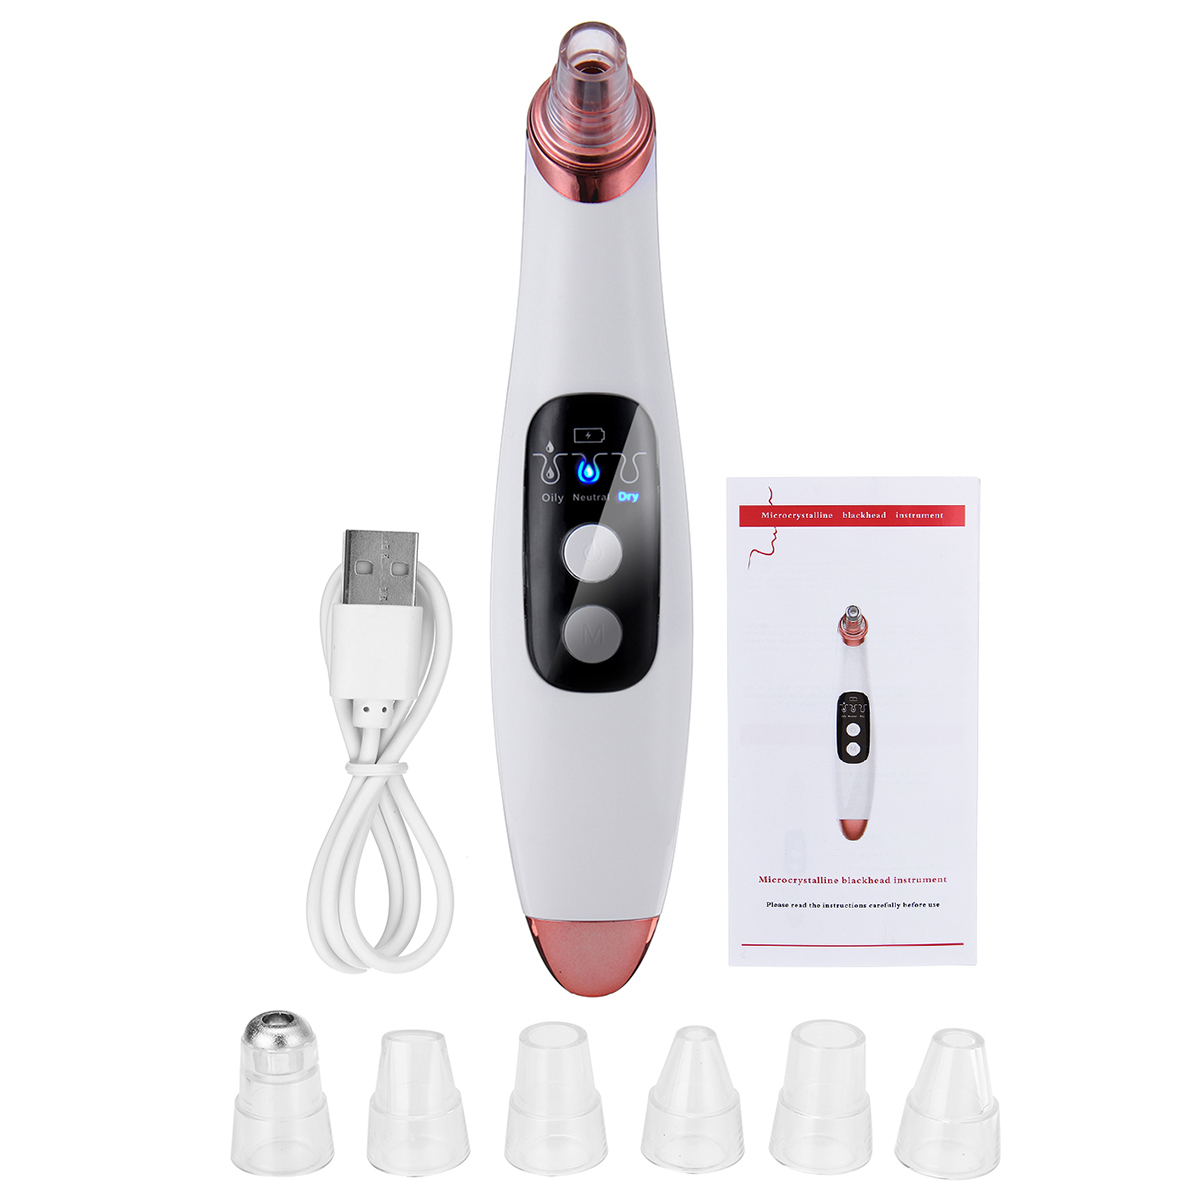 Blackhead Remover Pore Vacuum USB Rechargeable Electric Blackhead Suction Pore Cleaner with LED Display